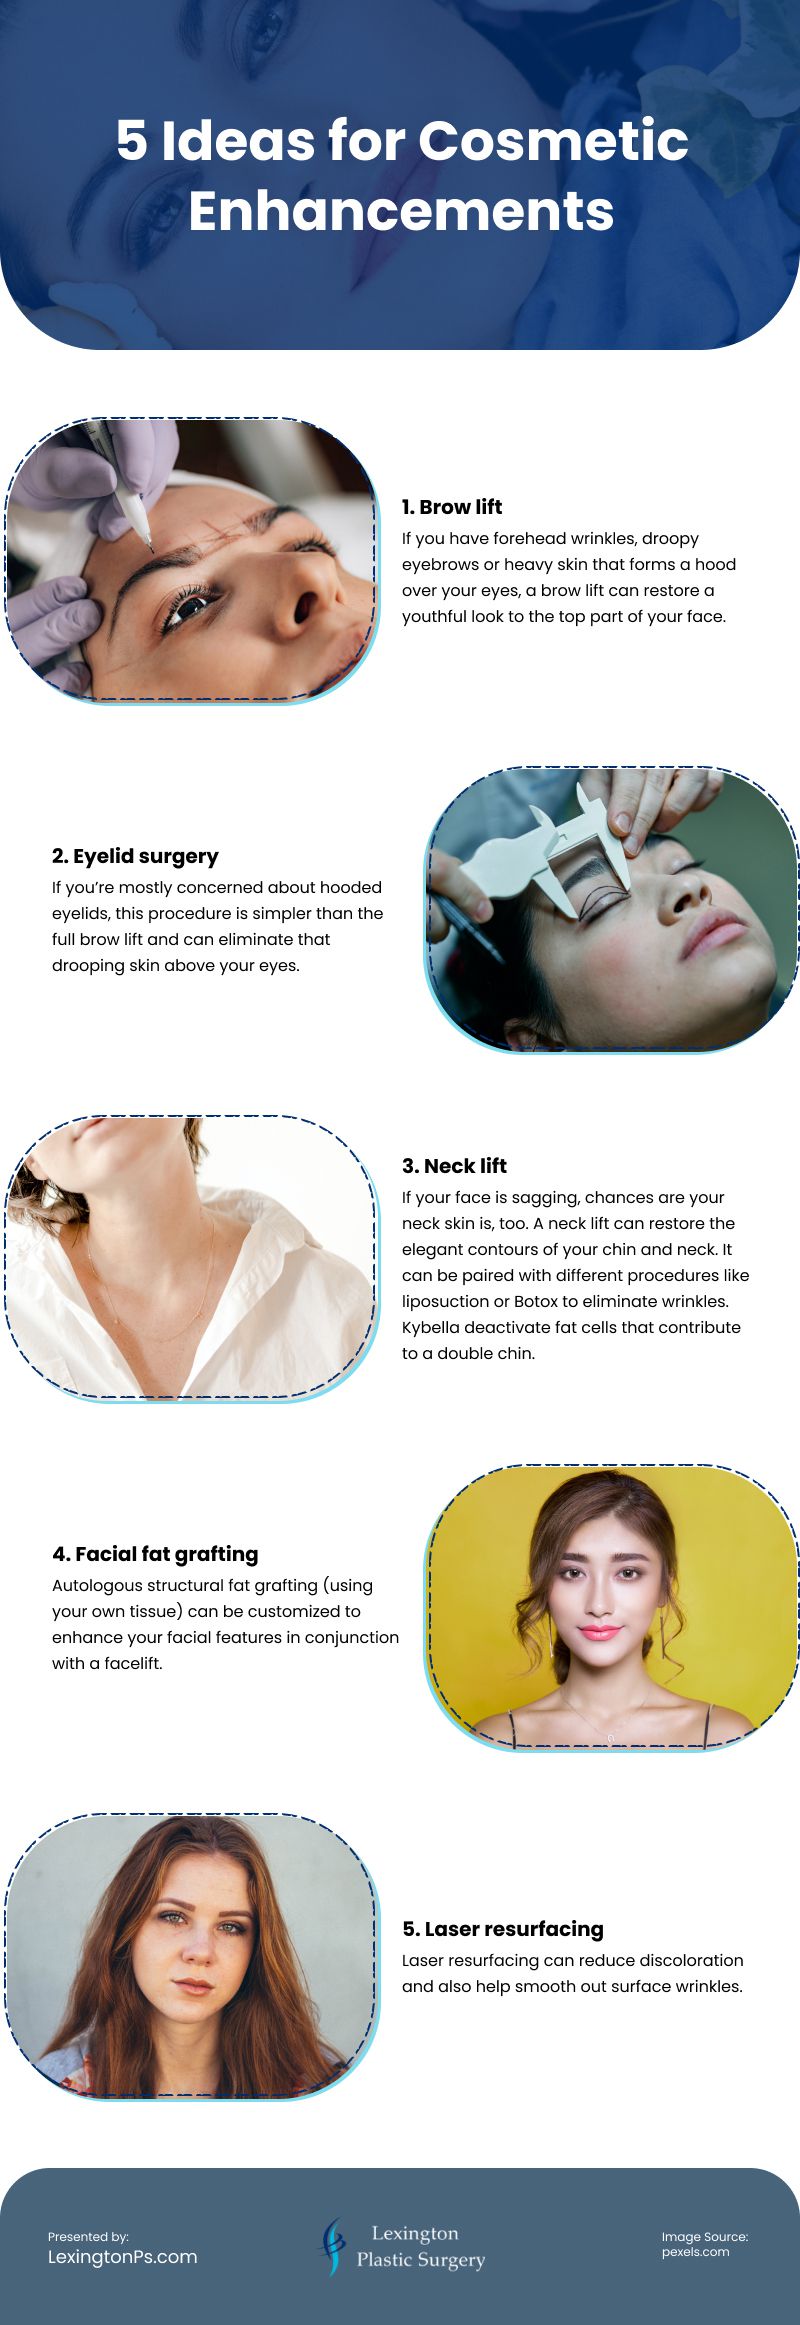 5 Ideas for Cosmetic Enhancements Infographic